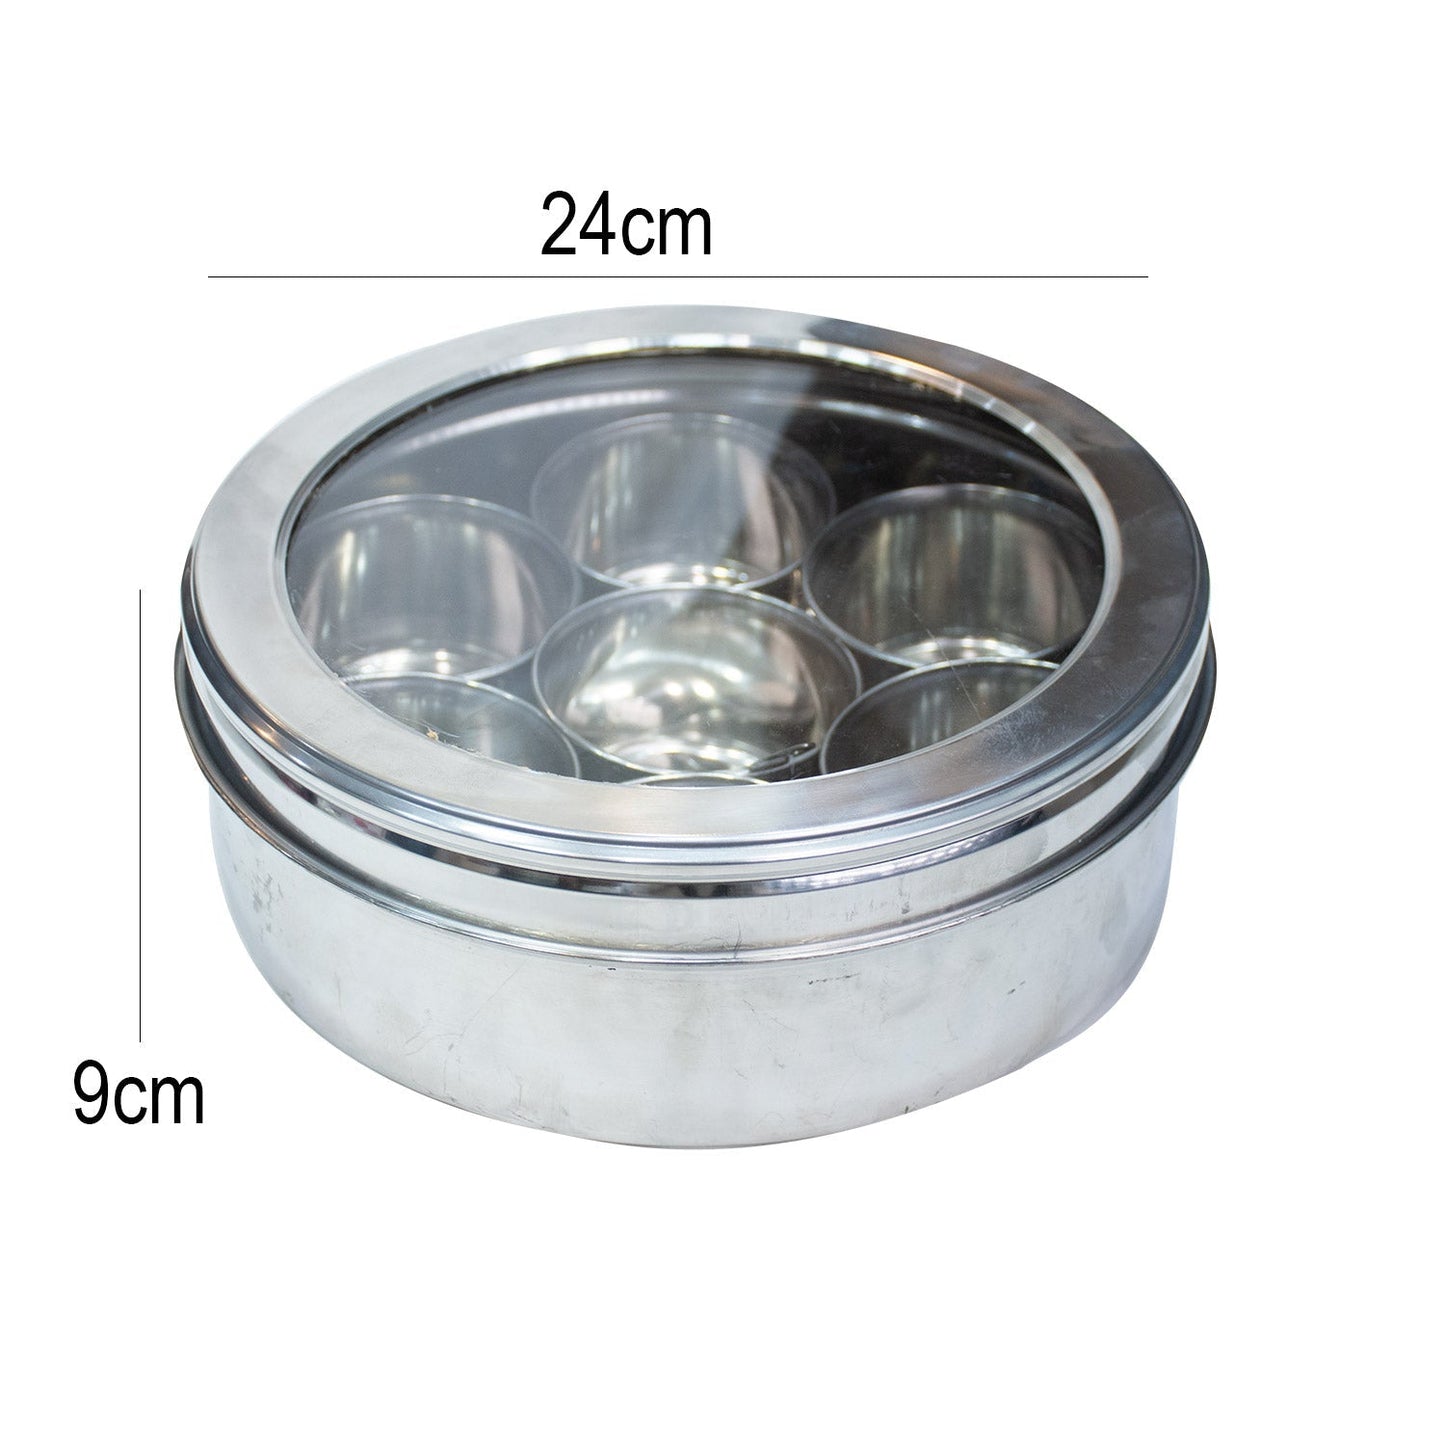 Stainless Steel 7 Bowls Spice Box With Transparent Lid Big Size